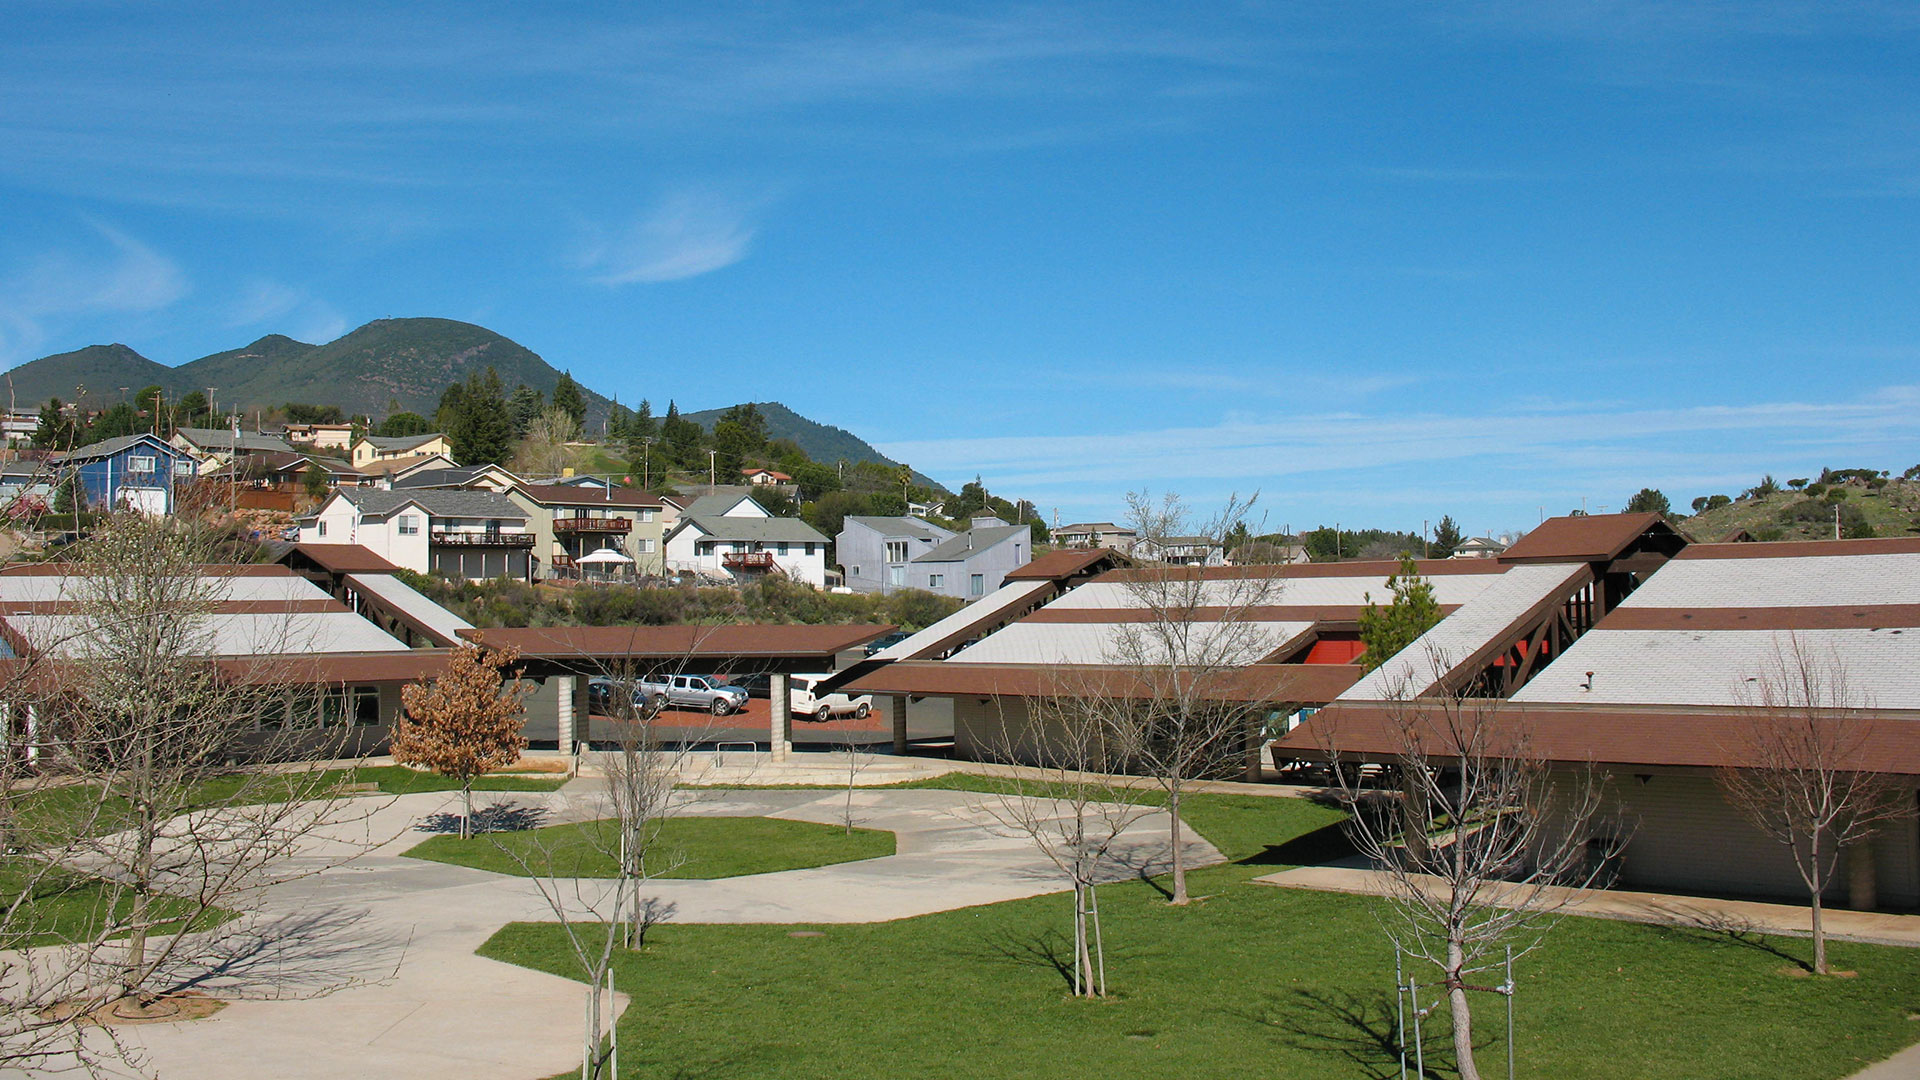 Campus courtyard with circular concrete walkway, and building with expansive white and brown roof behind.